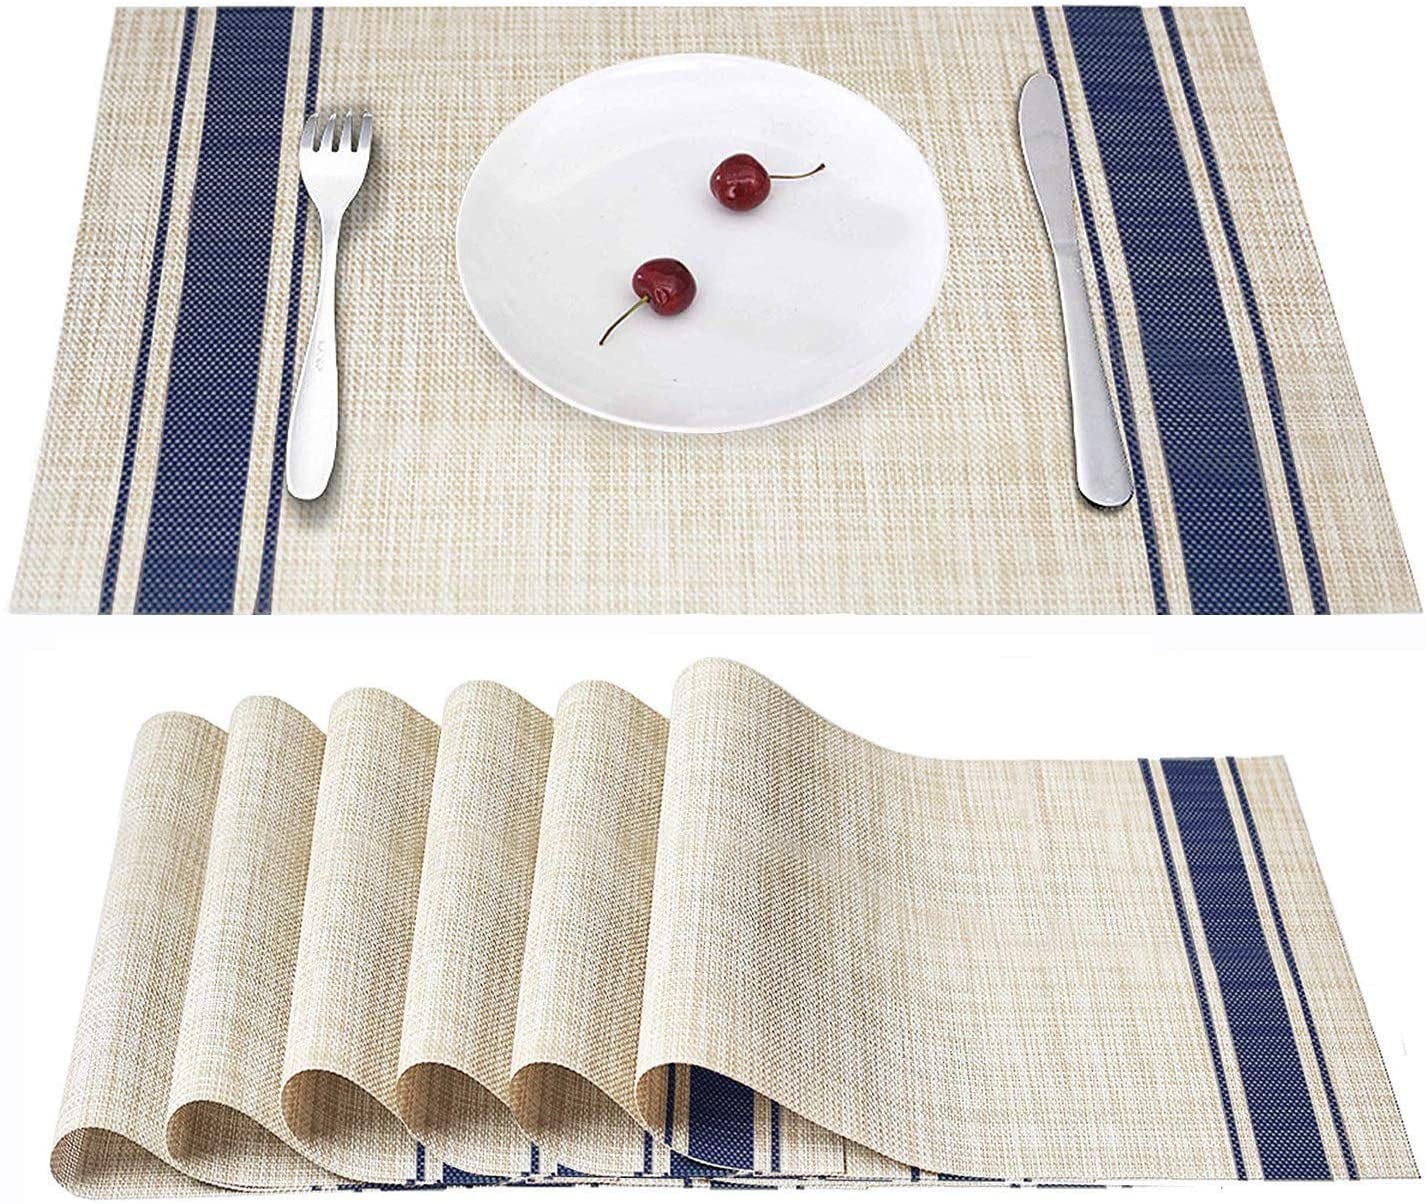 Placemats Leather Placemat Table PVC Mat for Kitchen Dining Room Set of 4 Waterproof Heat Resistant Washable Non Slip Anti-Stain 